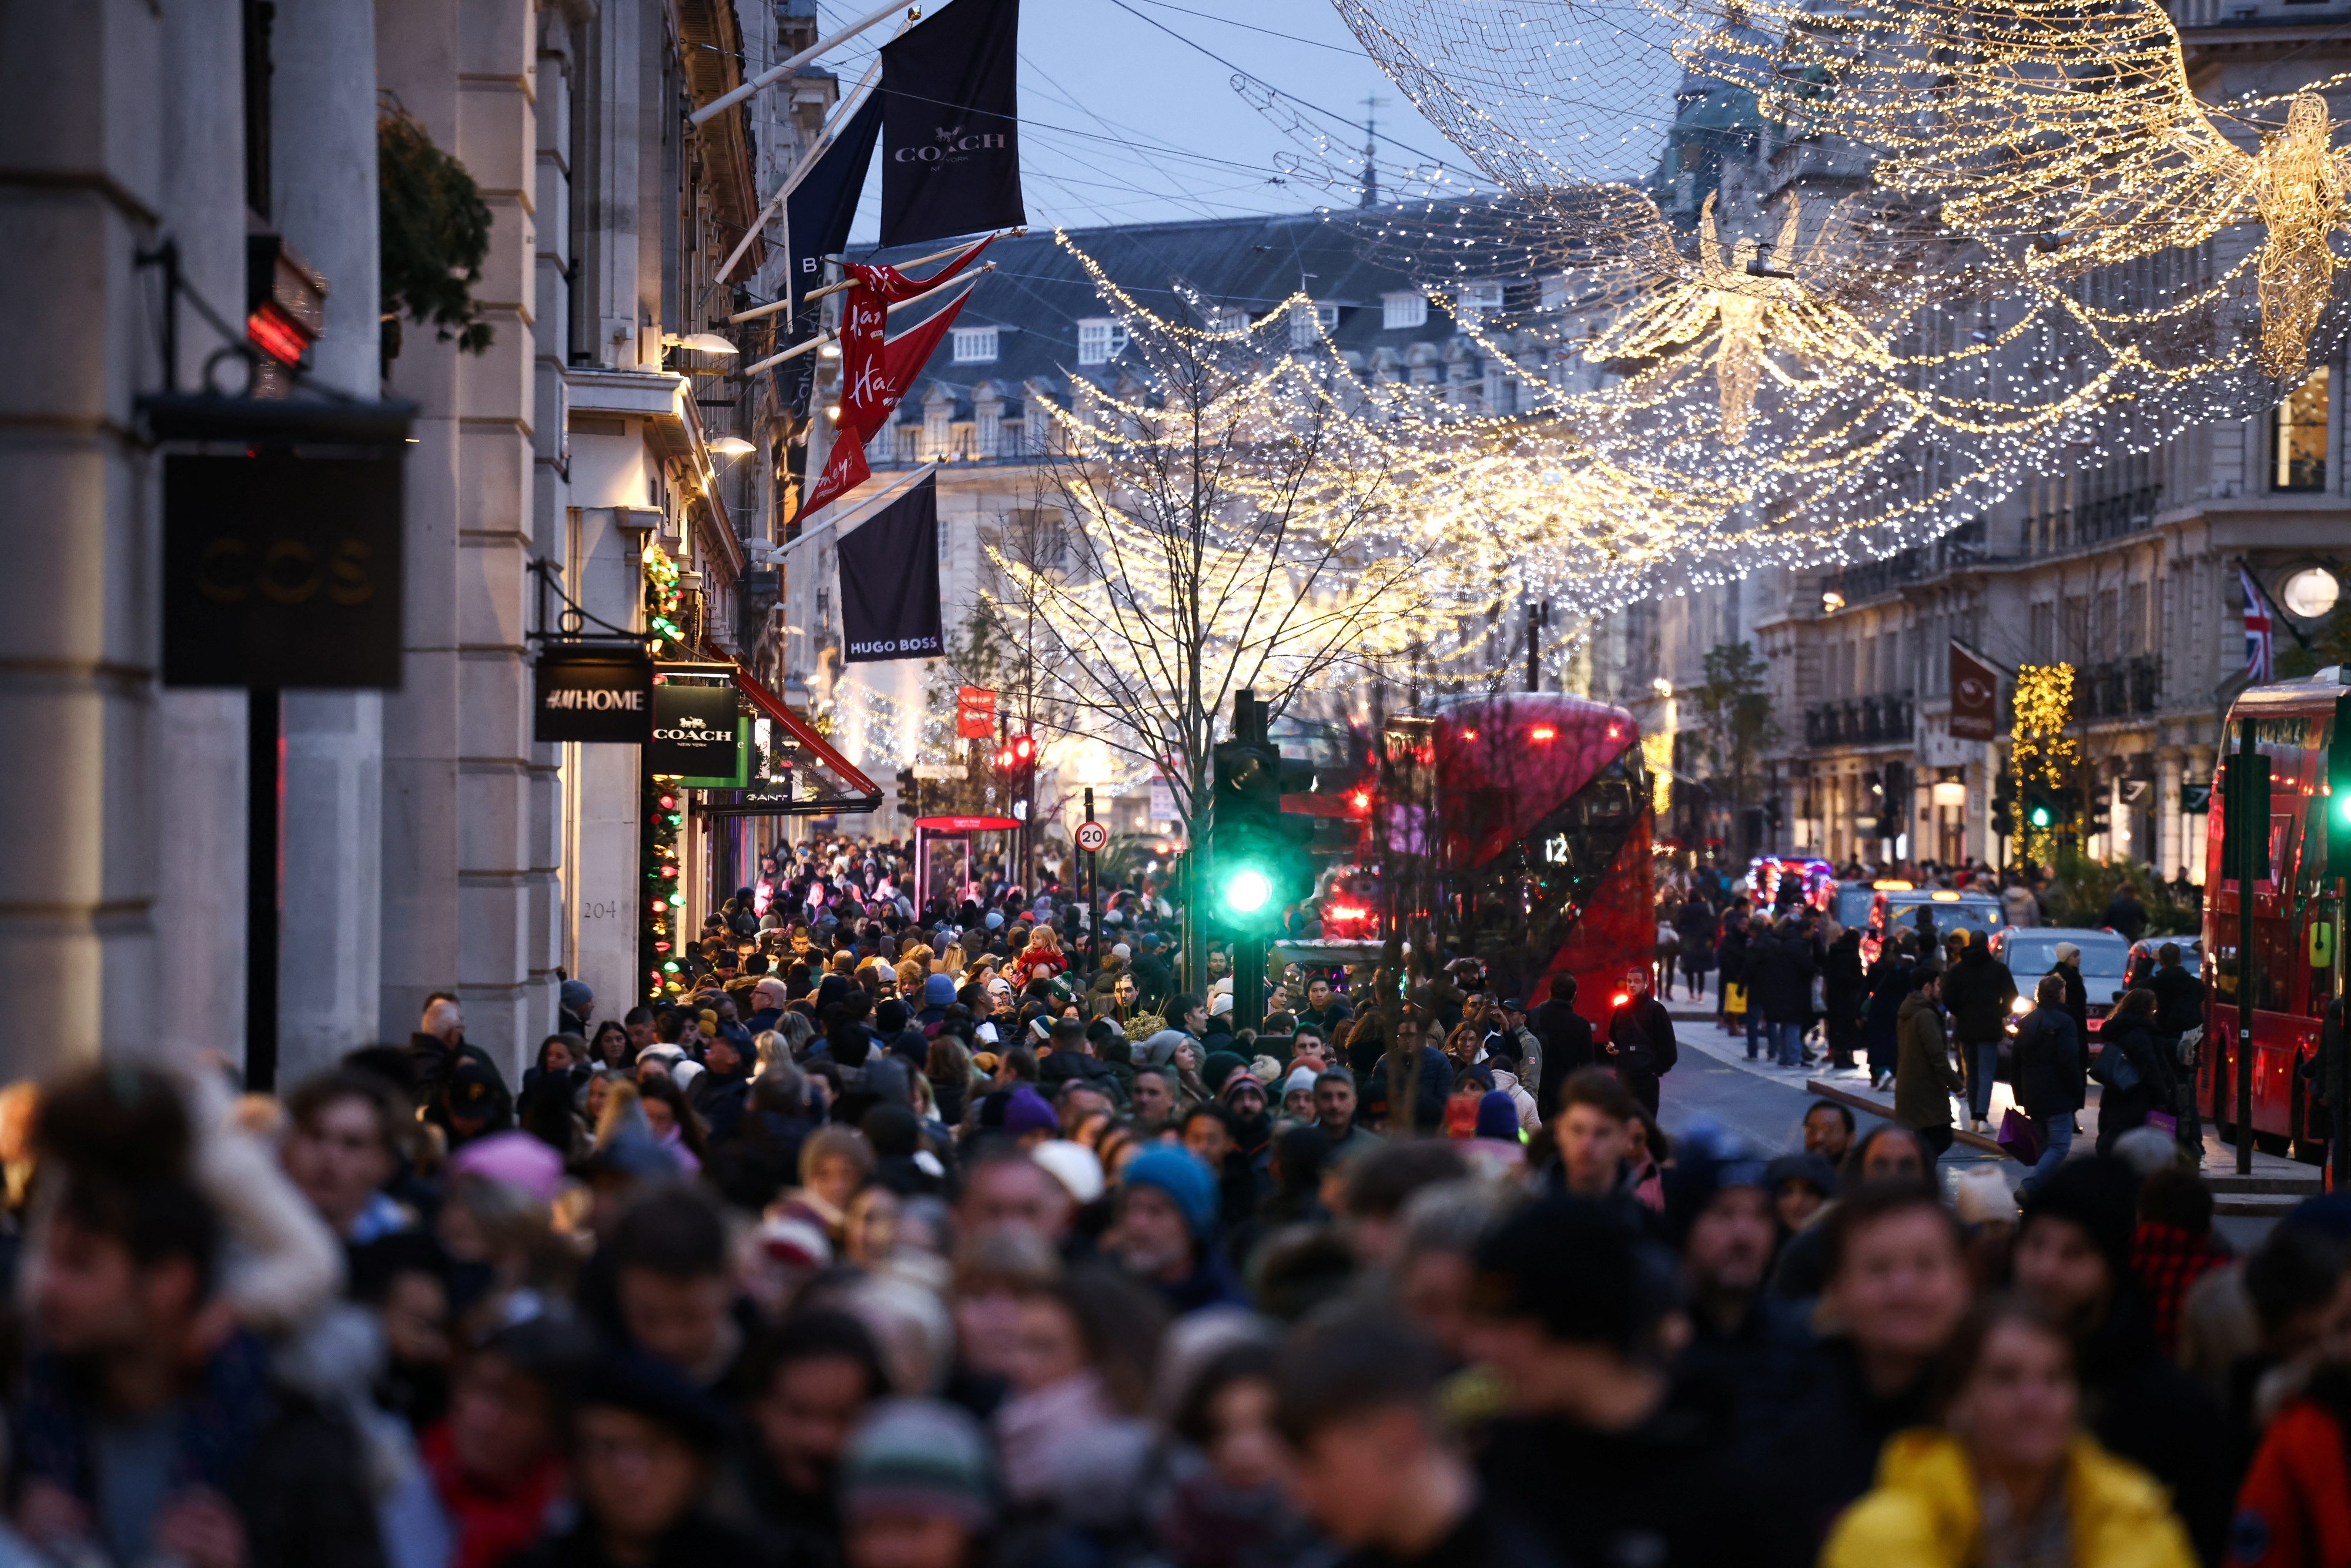 People carry shopping bags as they walk past Christmas themed shop displays on Regent Street in London